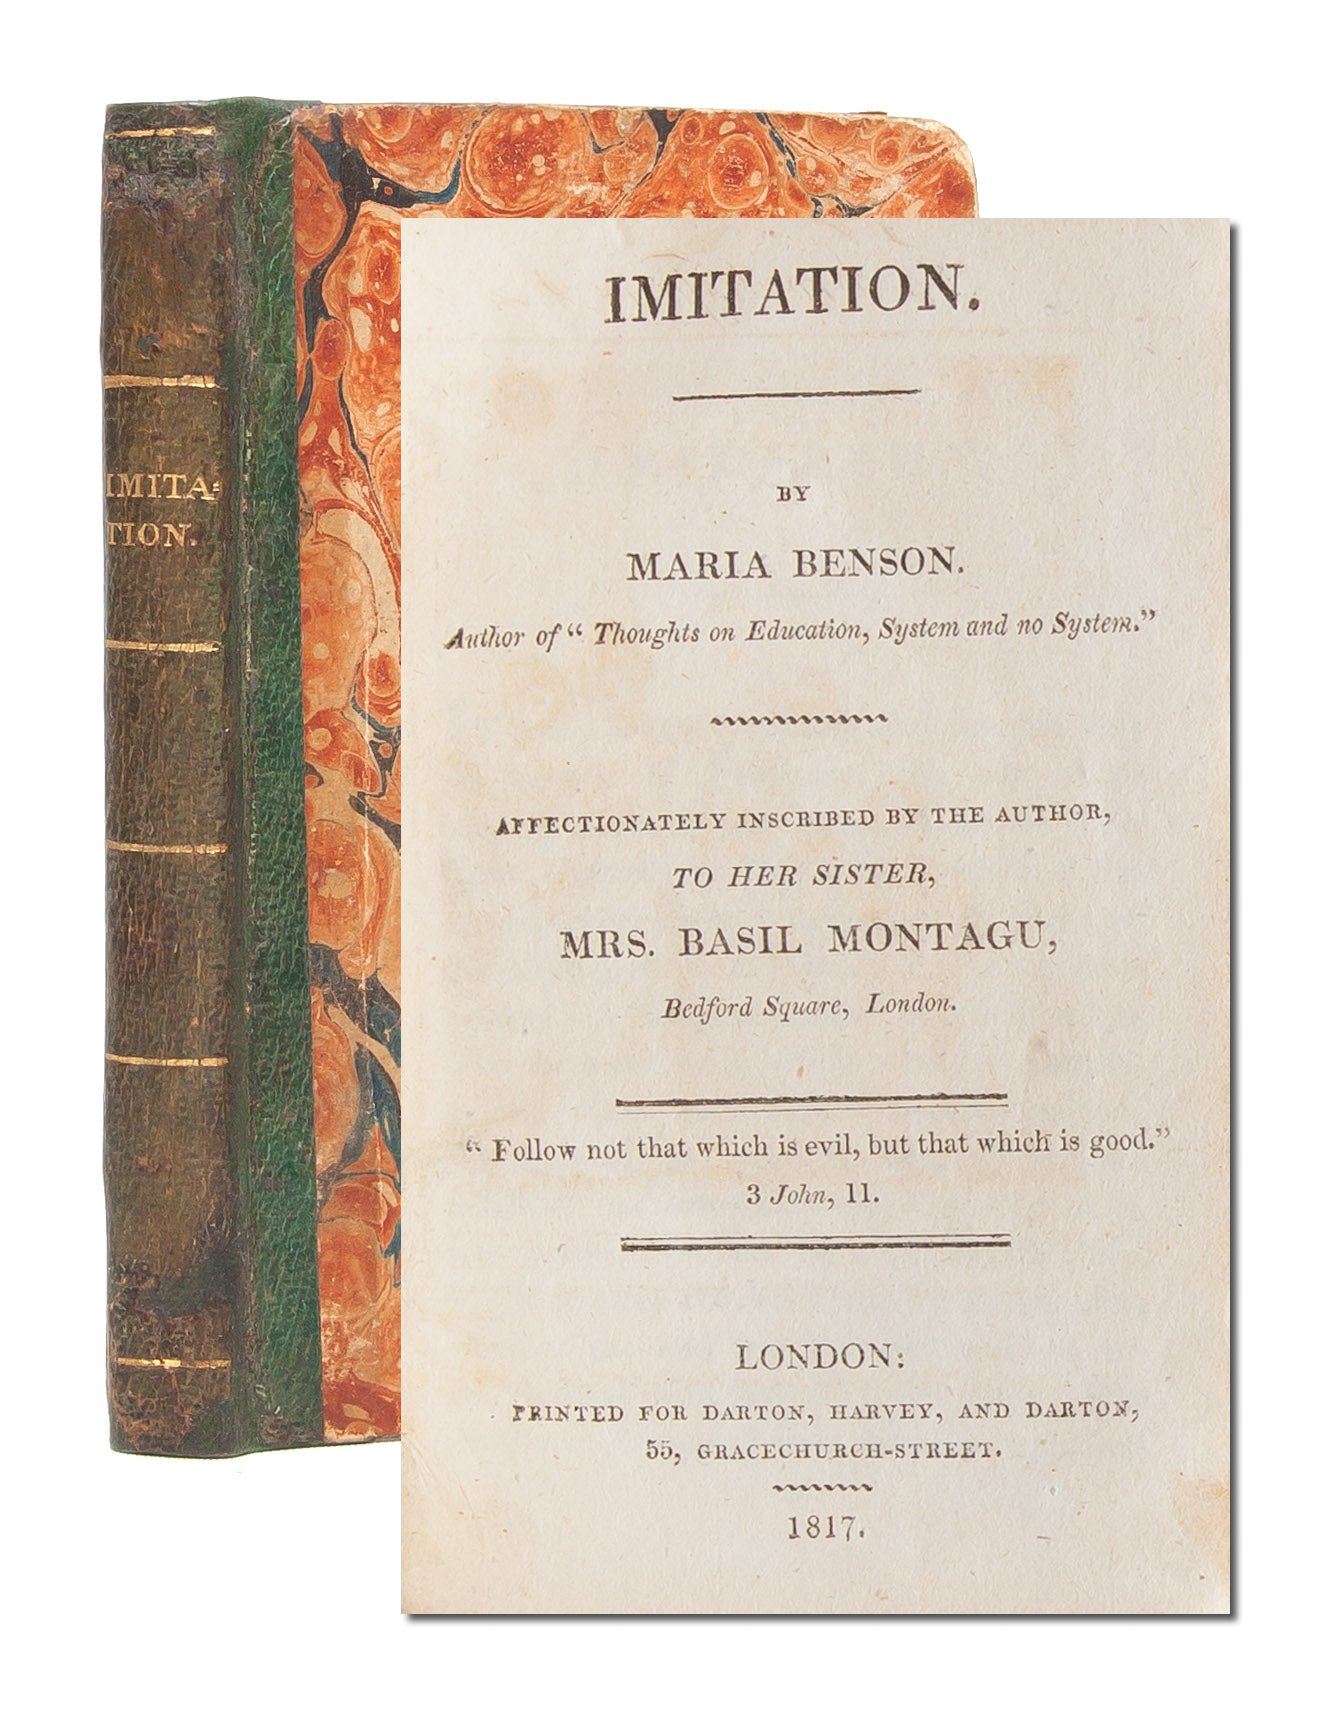 (Item #5735) Imitation. Affectionately inscribed by the Author to her sister, Mrs. Basil Montagu. Maria Benson.